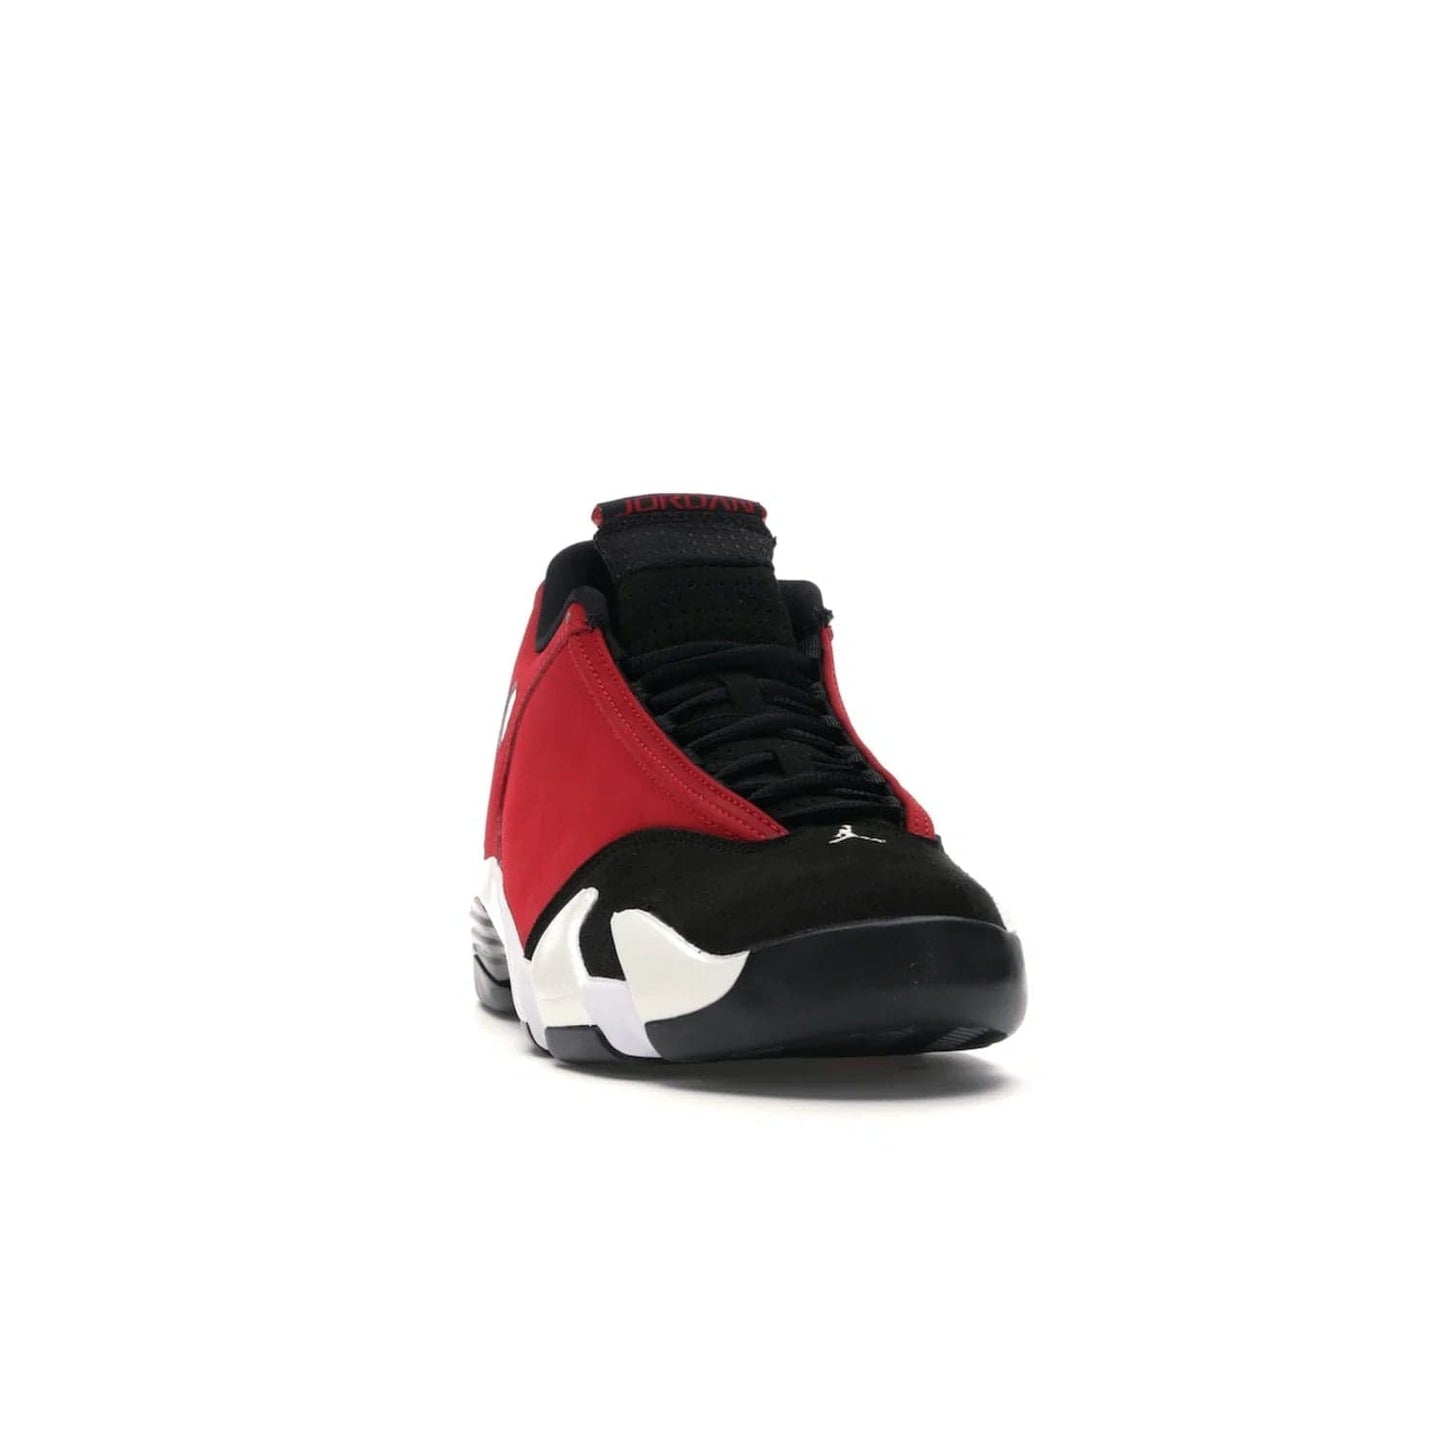 Jordan 14 Retro Gym Red Toro - Image 8 - Only at www.BallersClubKickz.com - Feel the Chicago Bulls energy with the Jordan 14 Retro Gym Red Toro! Black, red, and white design unites performance and fashion. Get your hands on this limited edition Jordan and show off your style today.